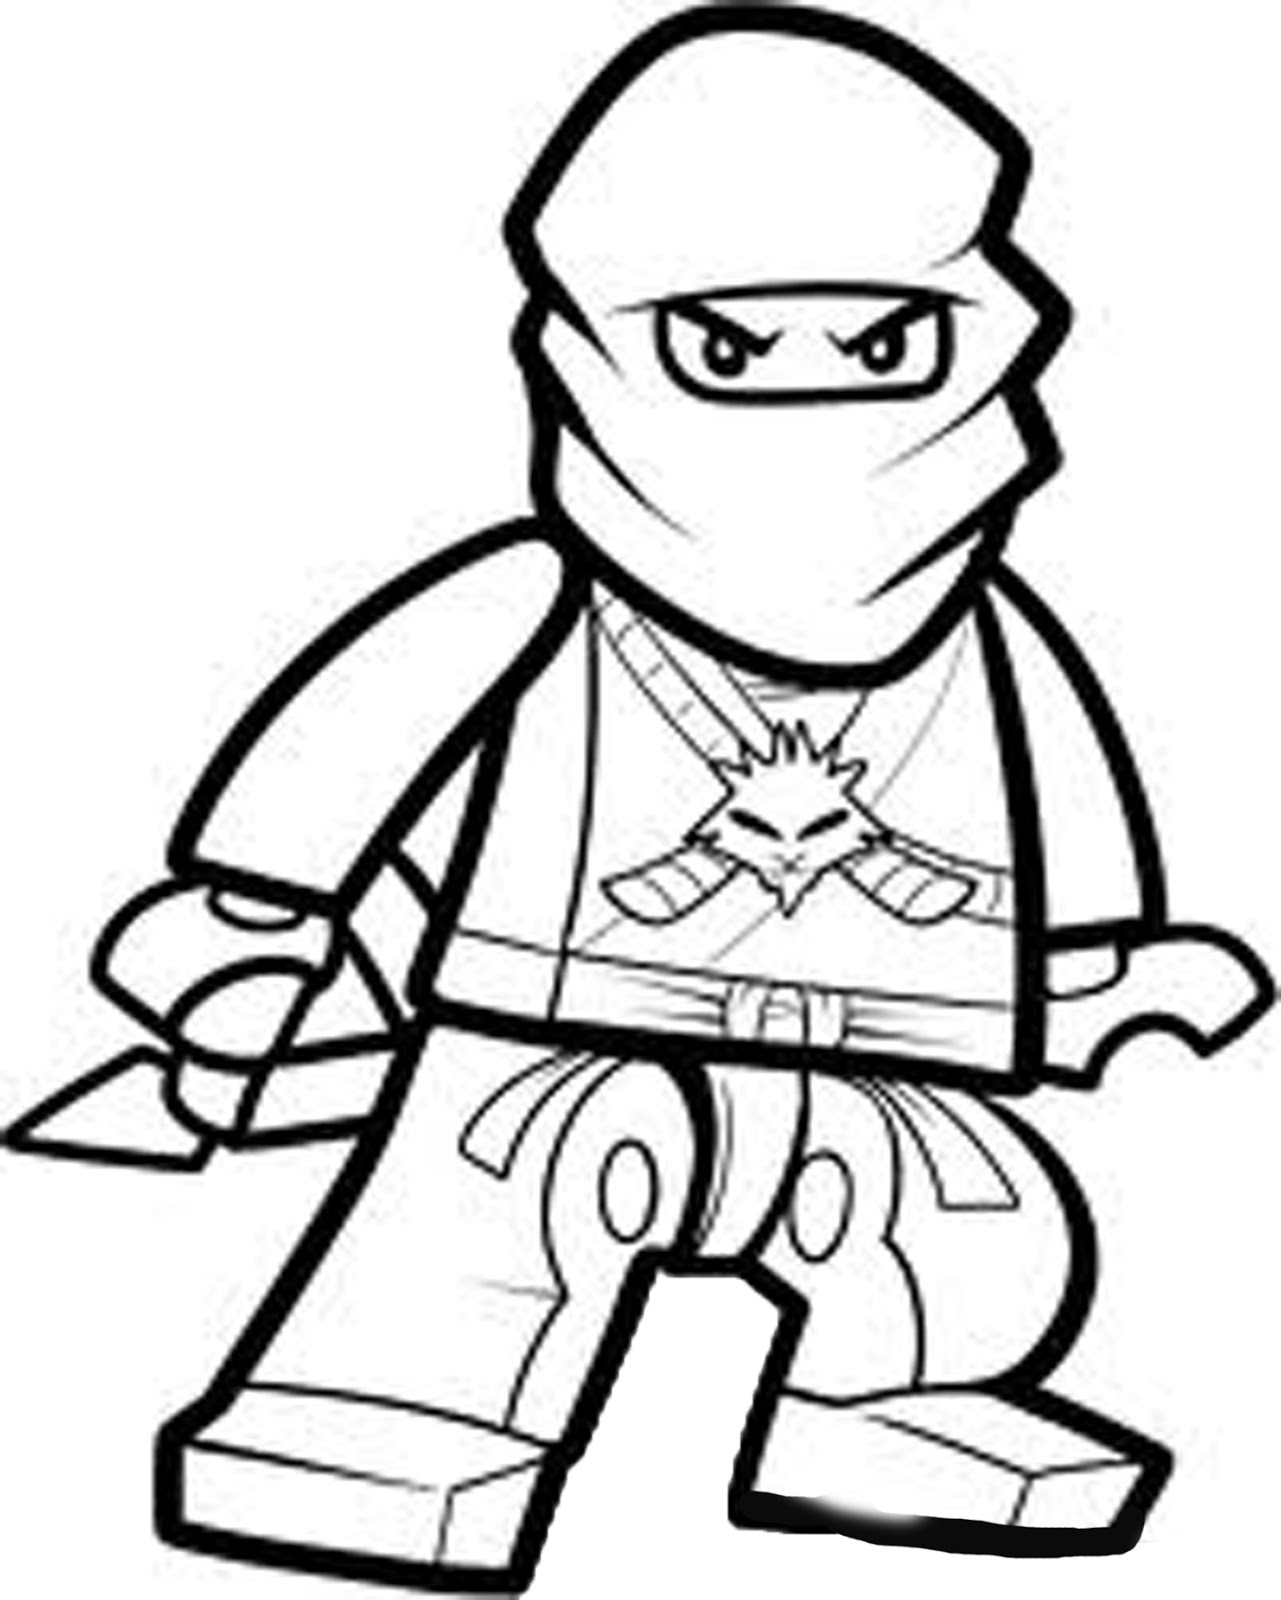 Free Personalized Coloring Pages For Kids | [#] Fresh Coloring Pages